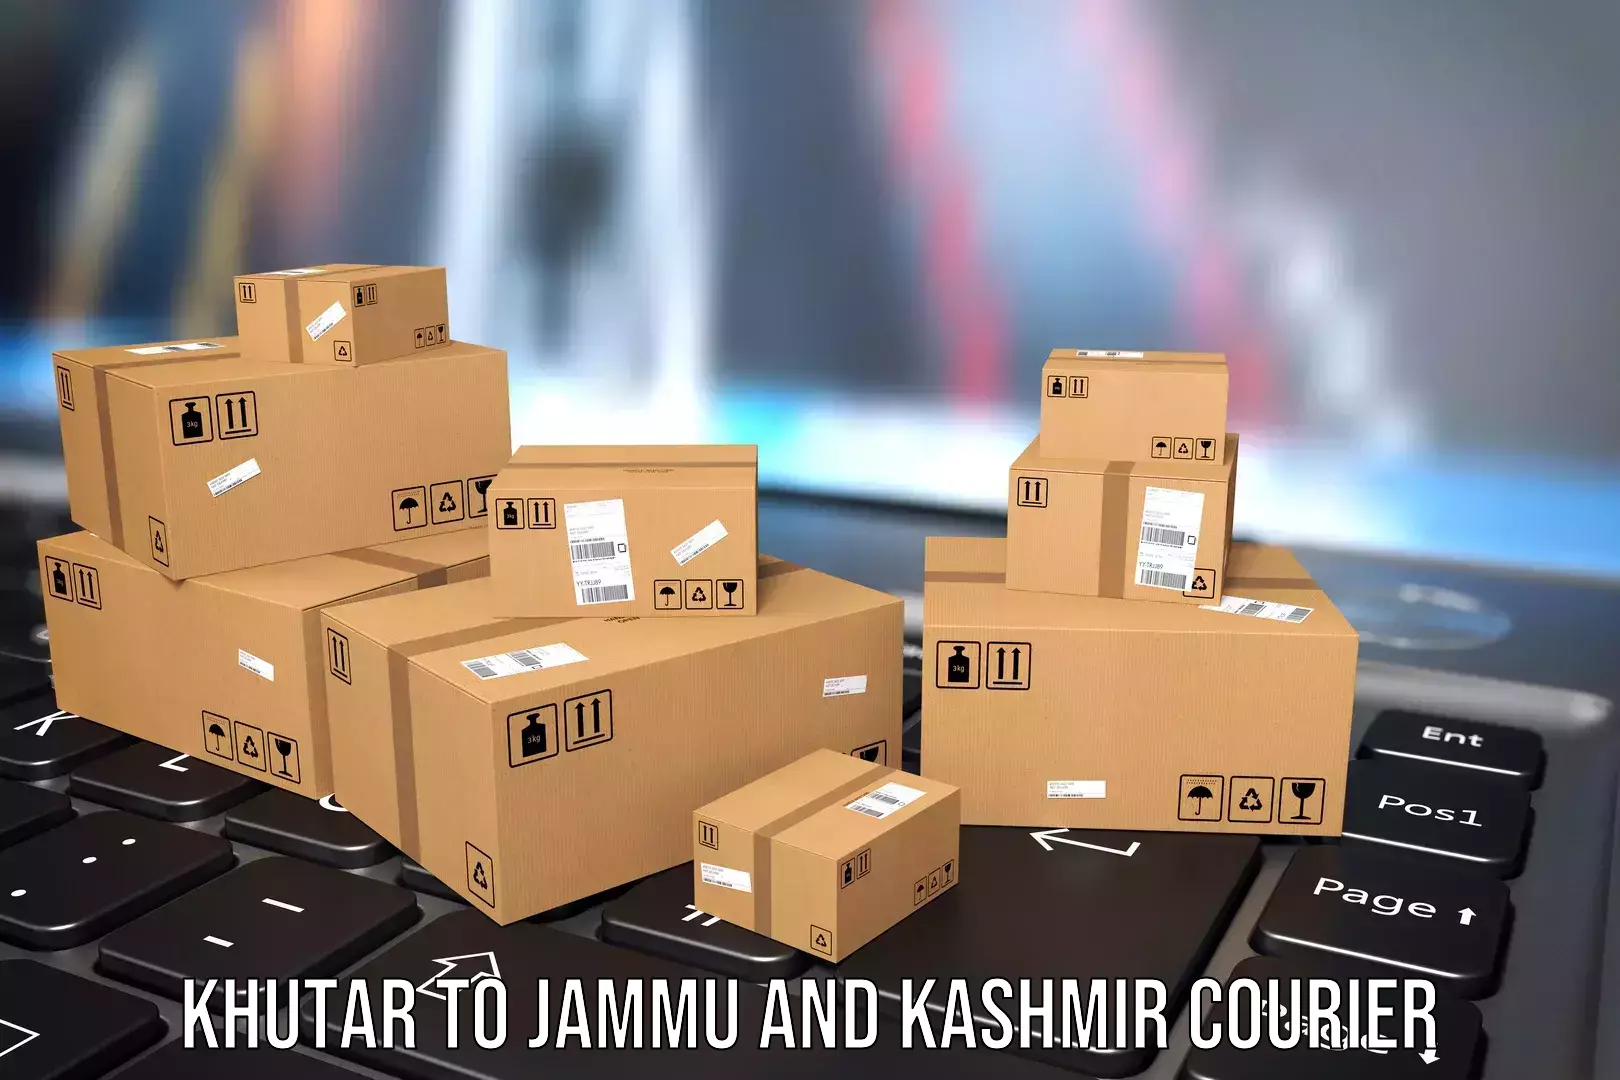 Luggage shipment specialists Khutar to Jammu and Kashmir